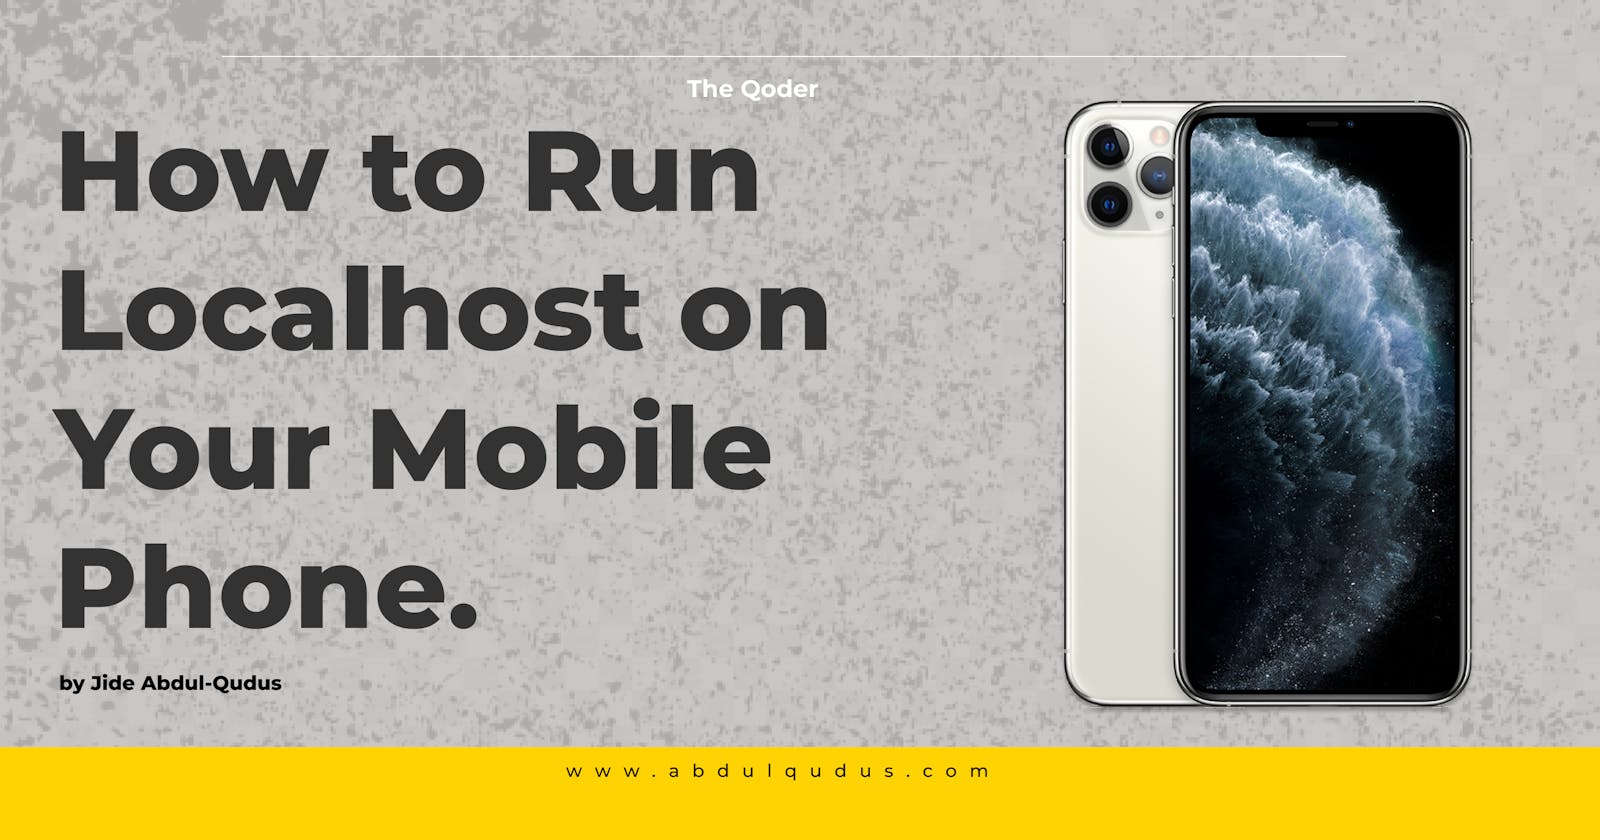 How to Run Localhost on Your Mobile Phone - A Step-by-Step Guide